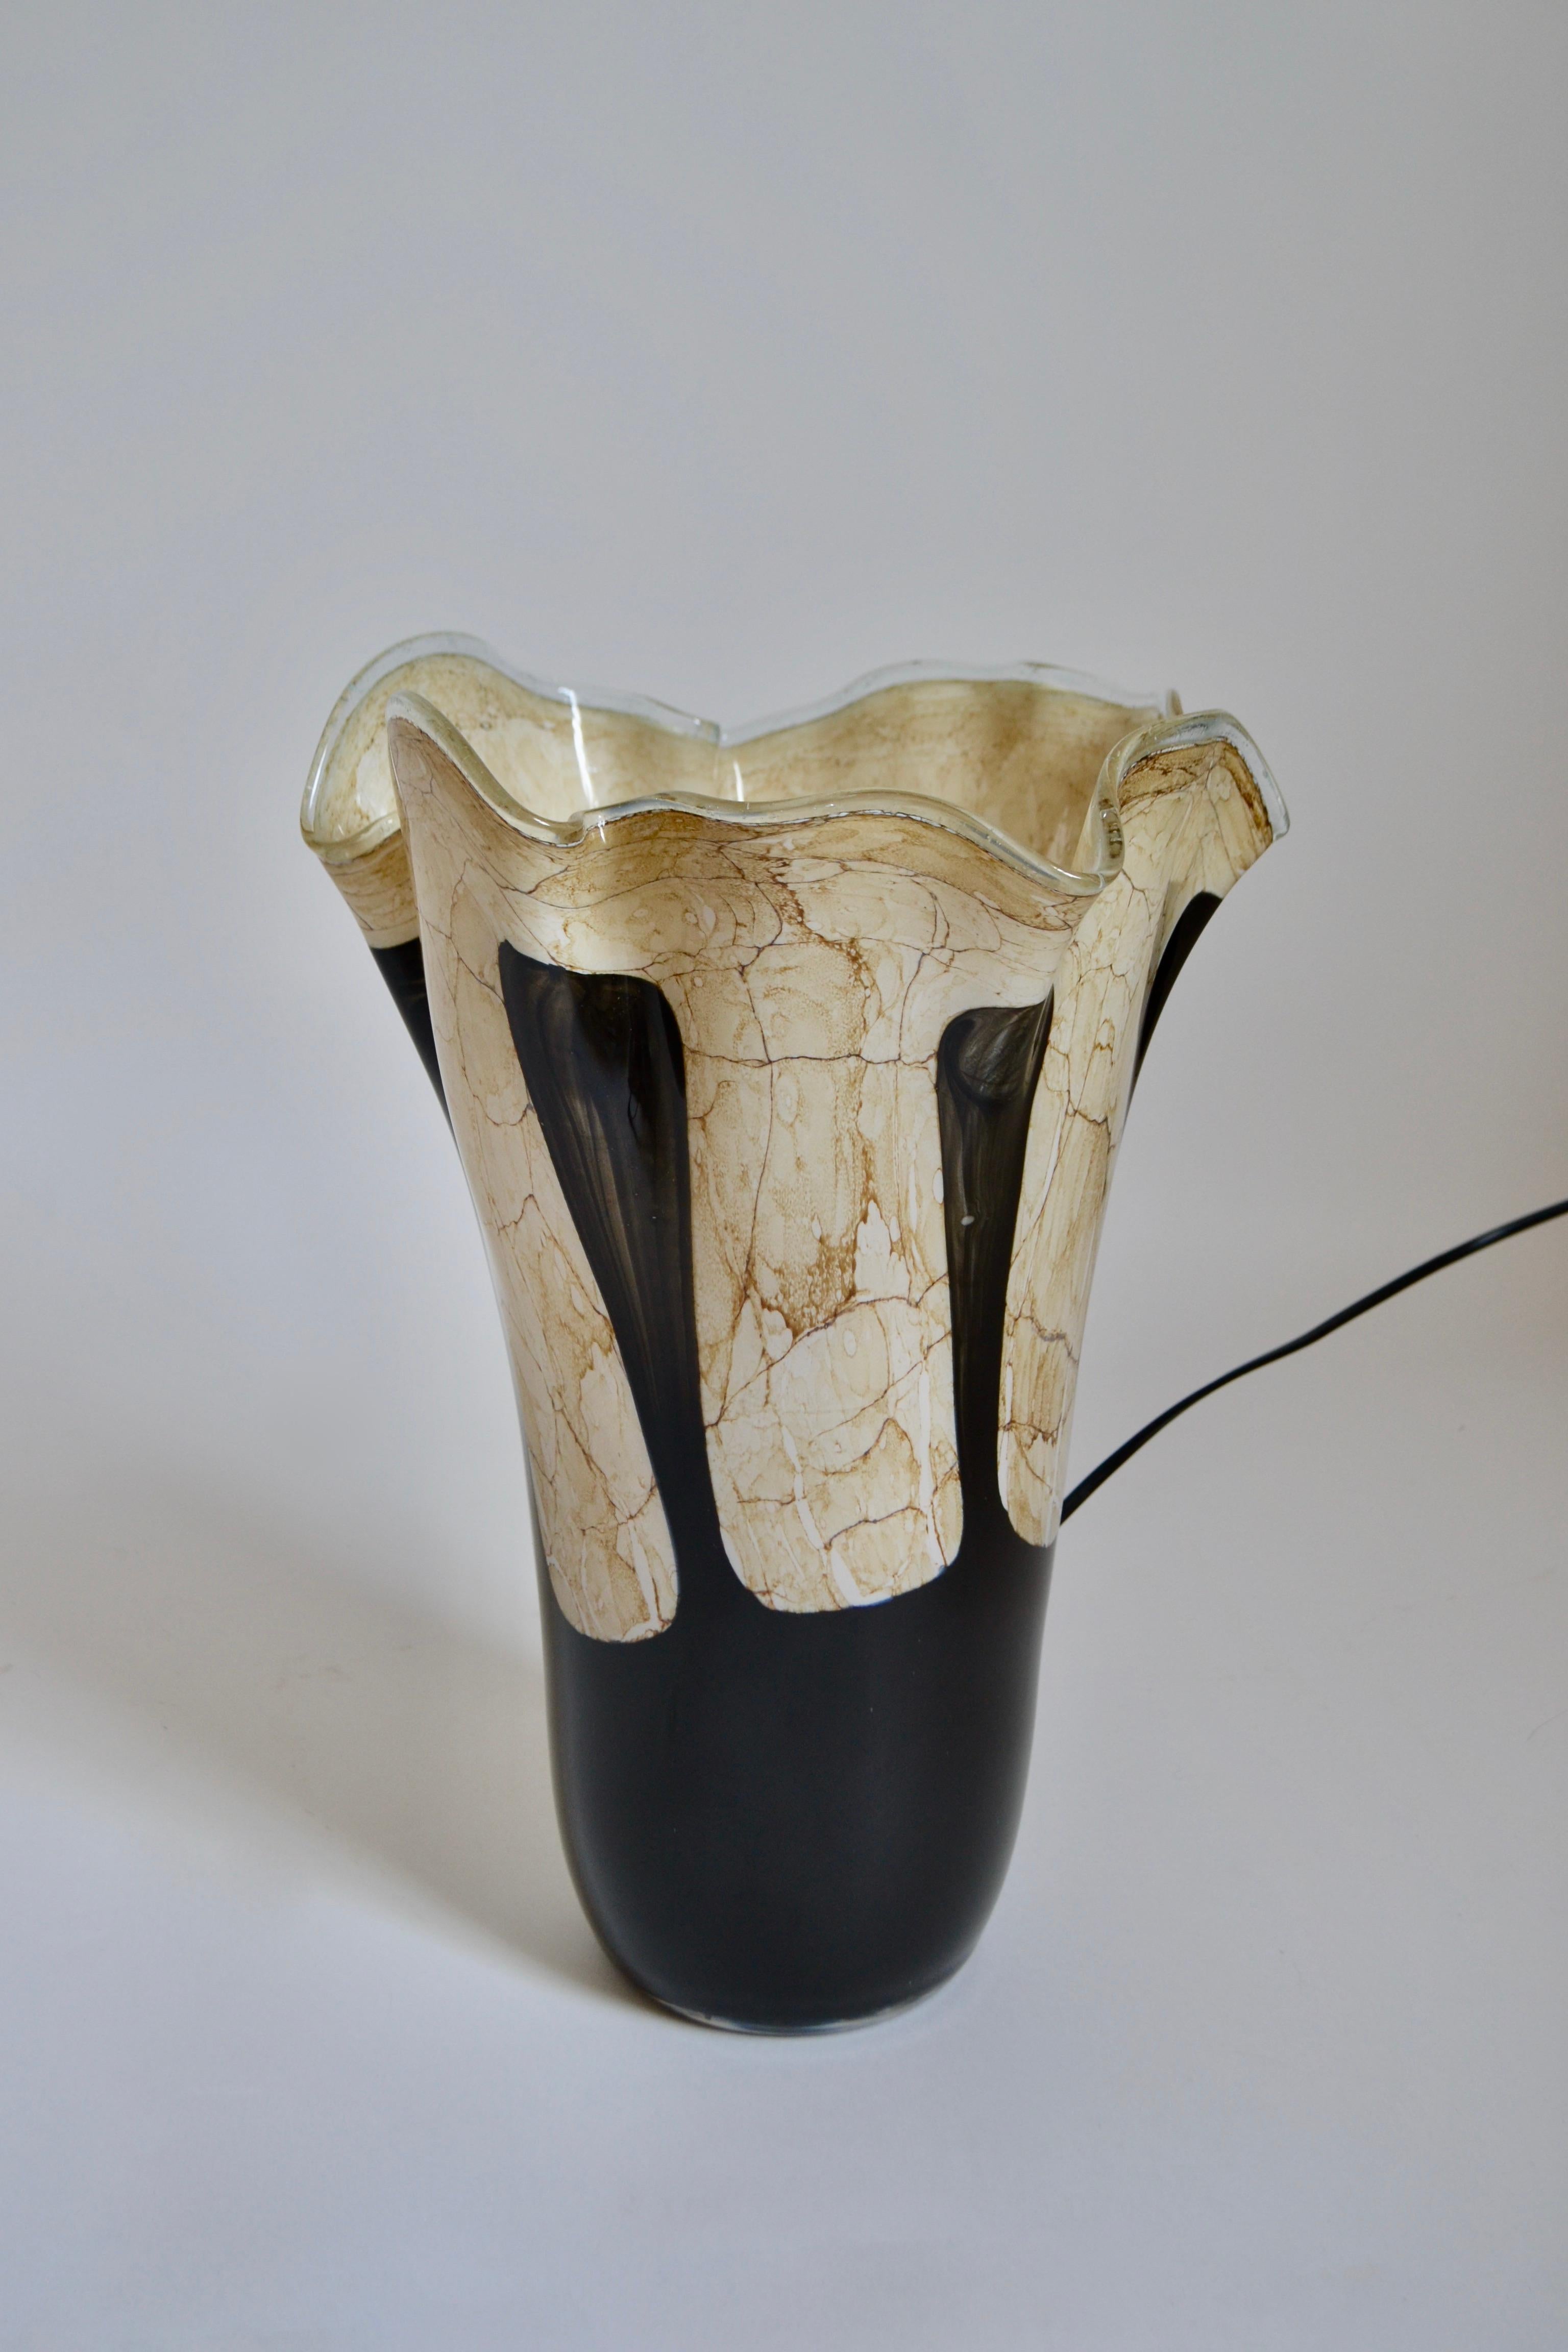 Fazzoletto / handkerchief shaped Italian glass table lamp by Murano with cream and black marble design from the 1960s. UK plug.